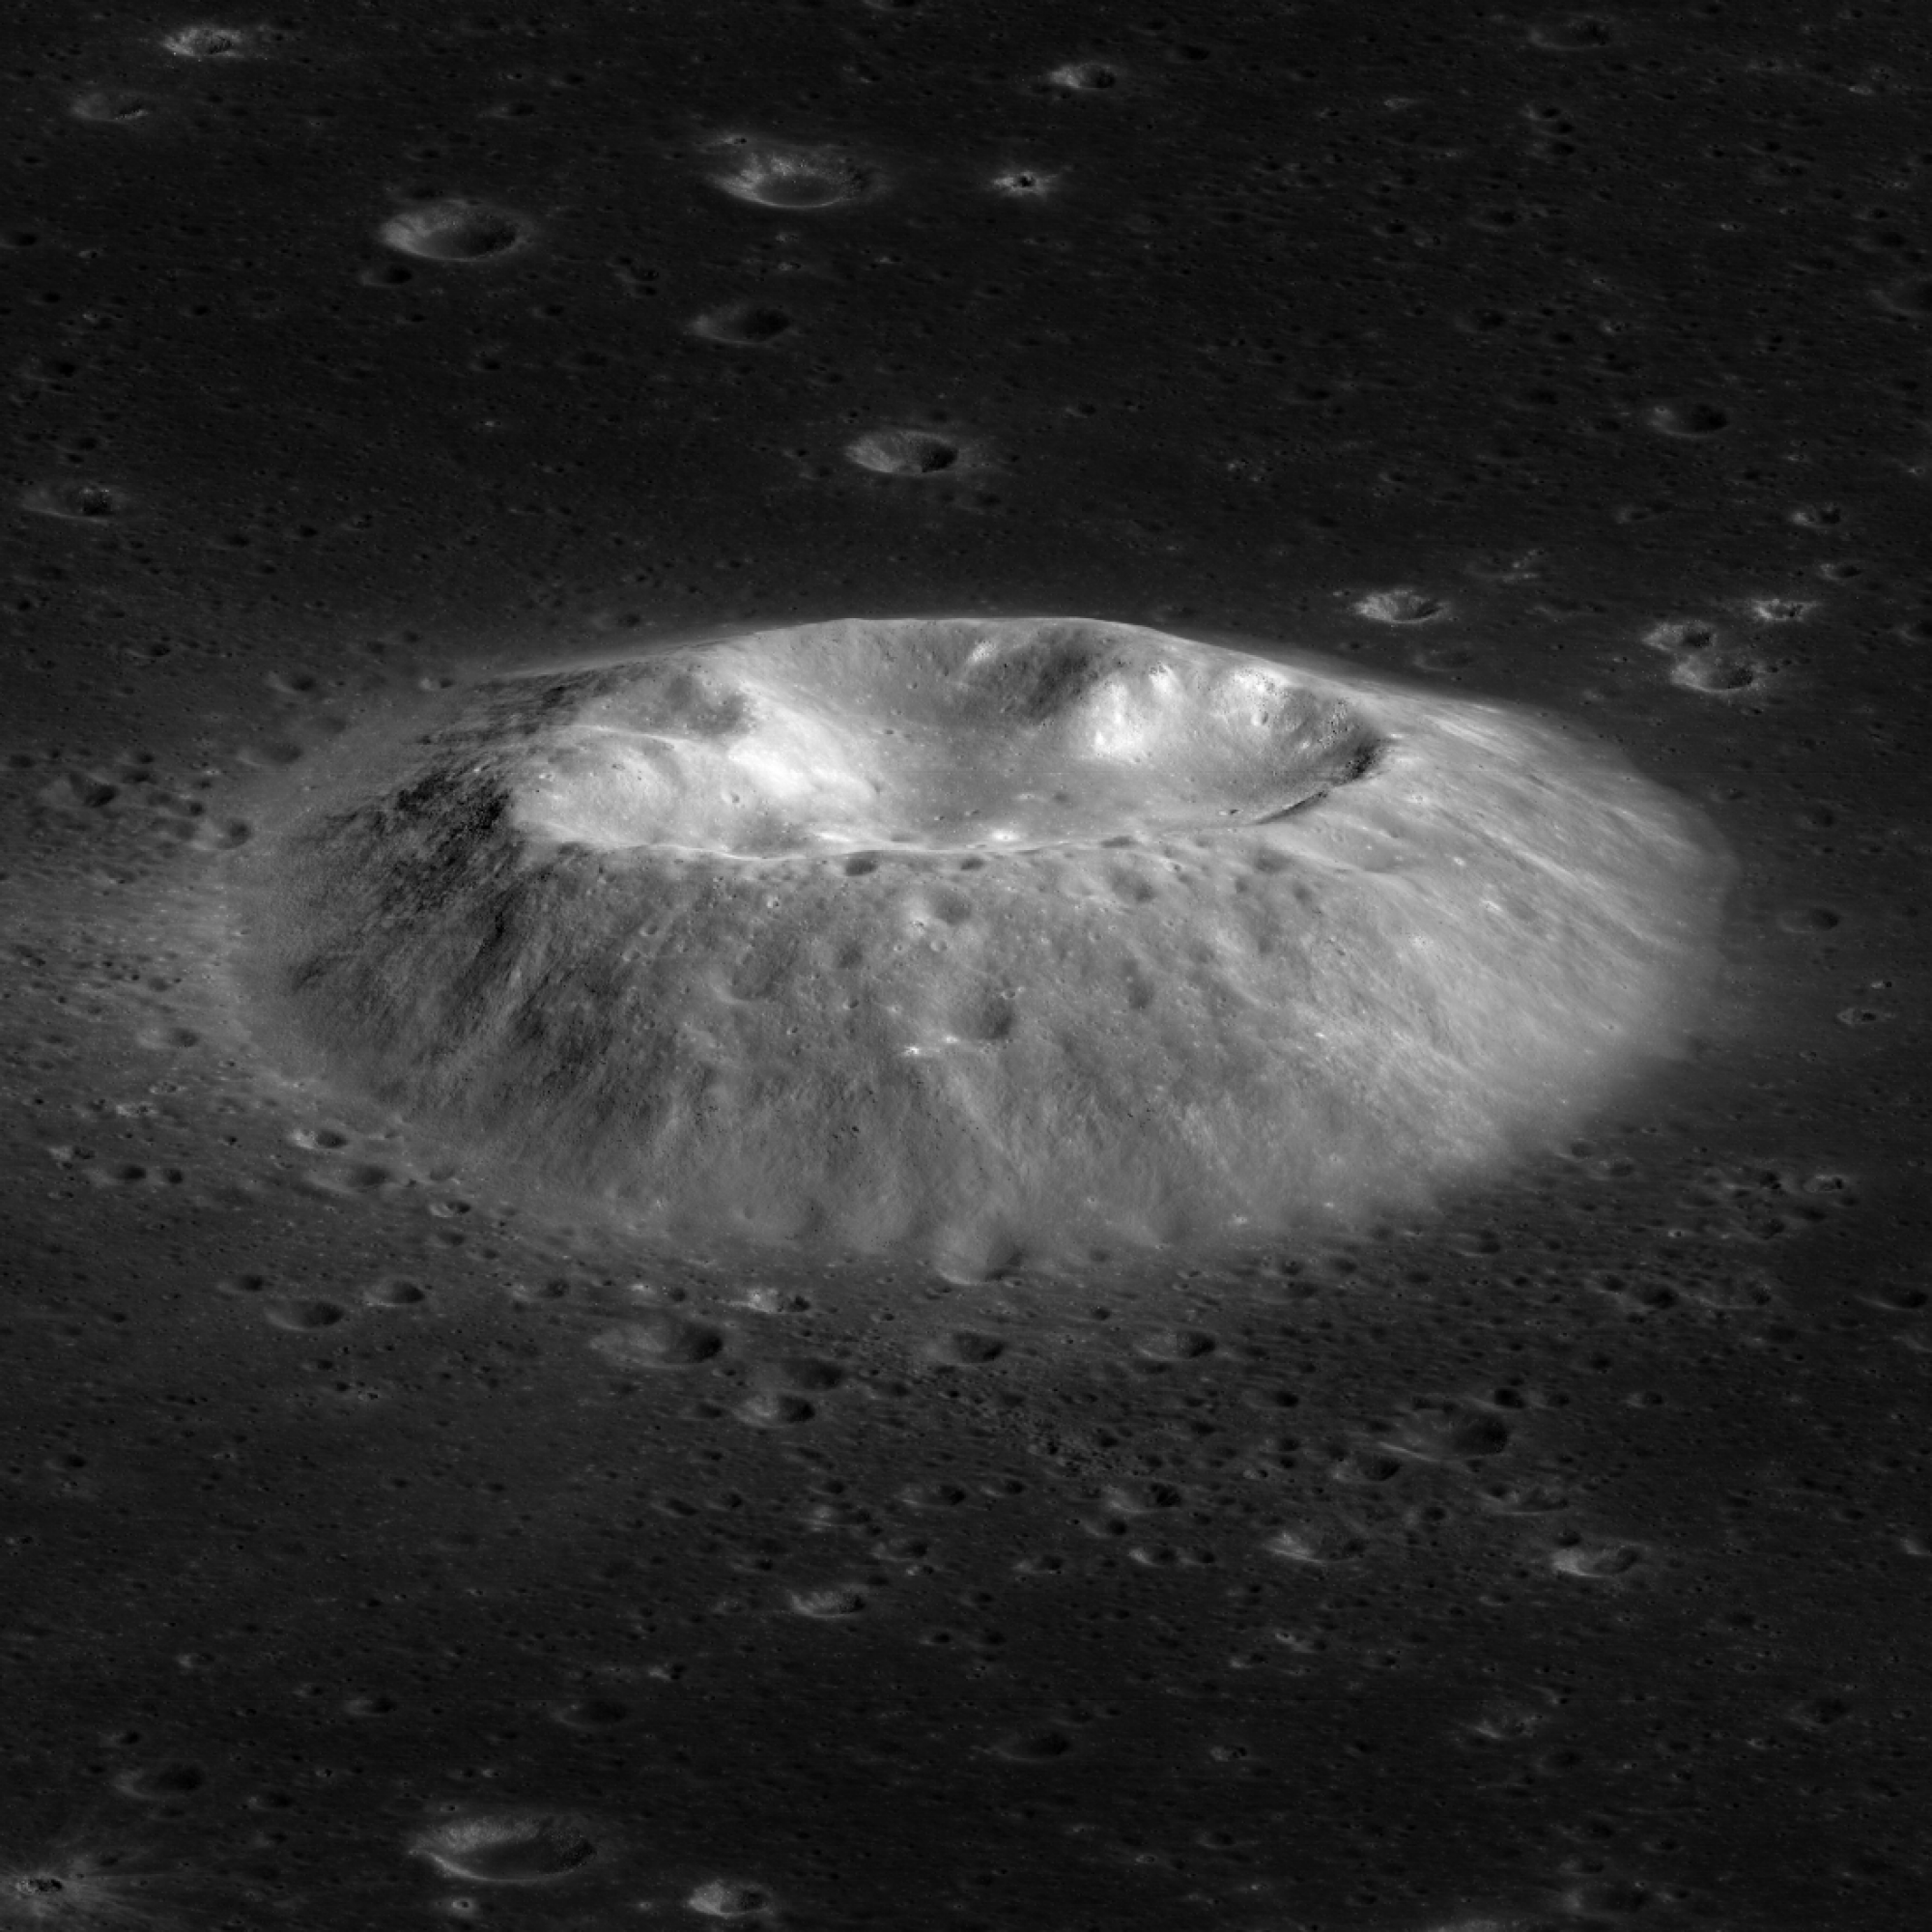 Investigating the moon's domes